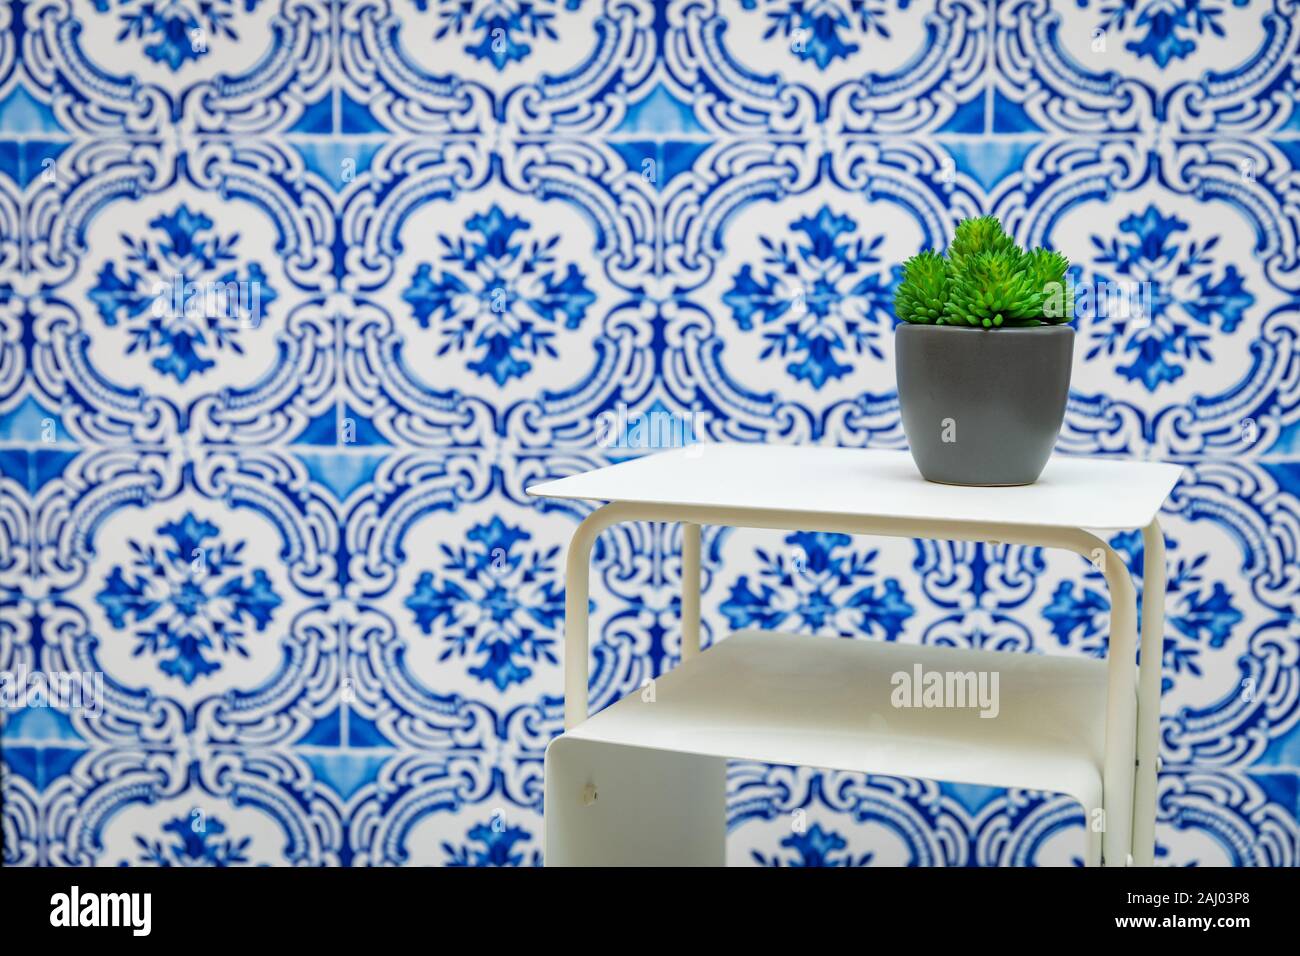 small white shelf with green plant on blue floral tiled wall background Stock Photo